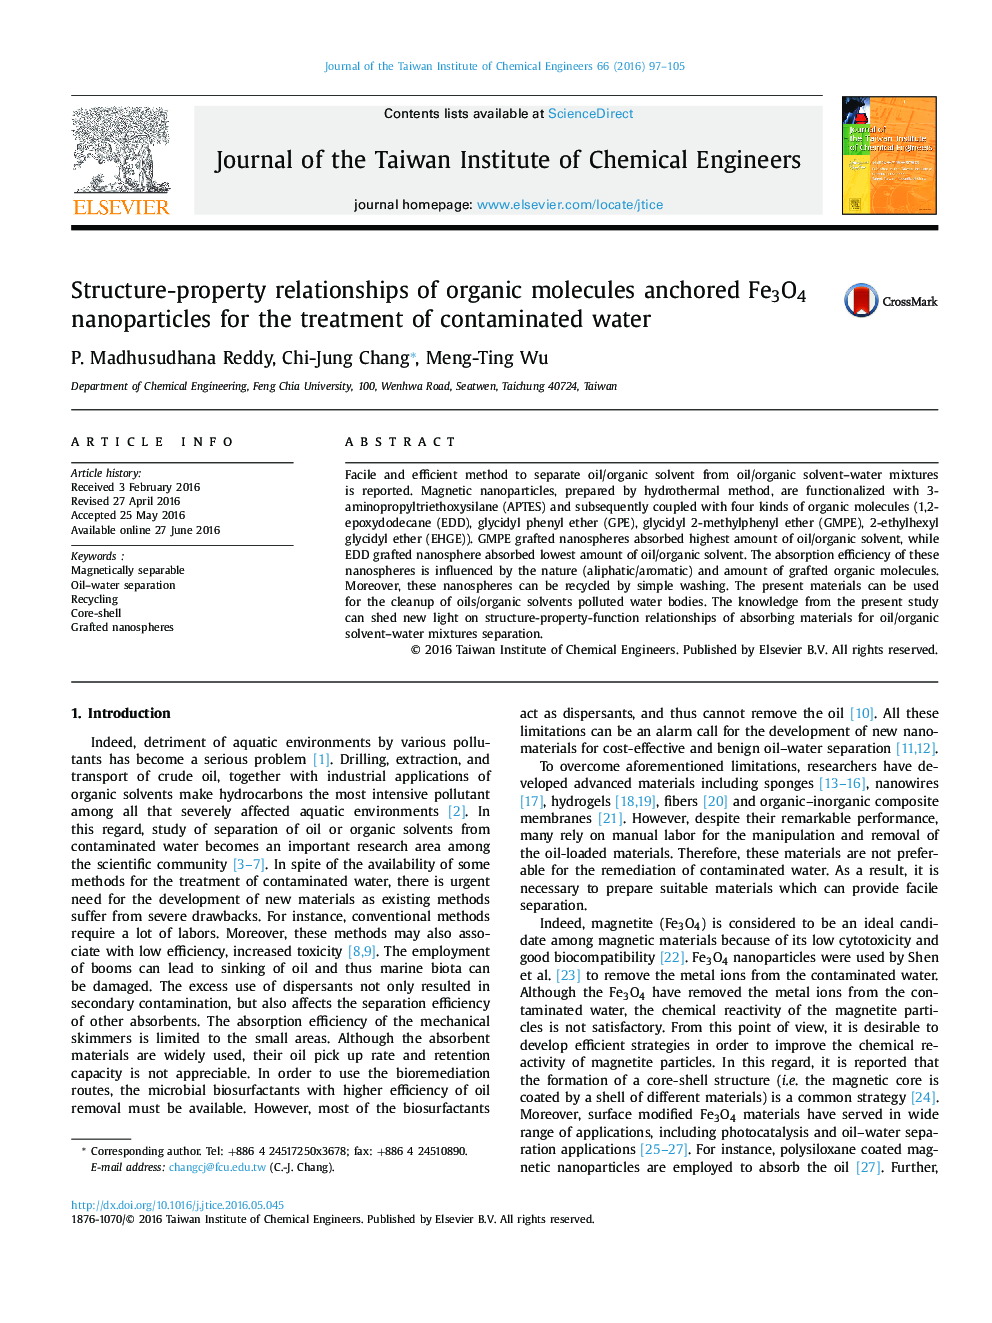 Structure-property relationships of organic molecules anchored Fe3O4 nanoparticles for the treatment of contaminated water